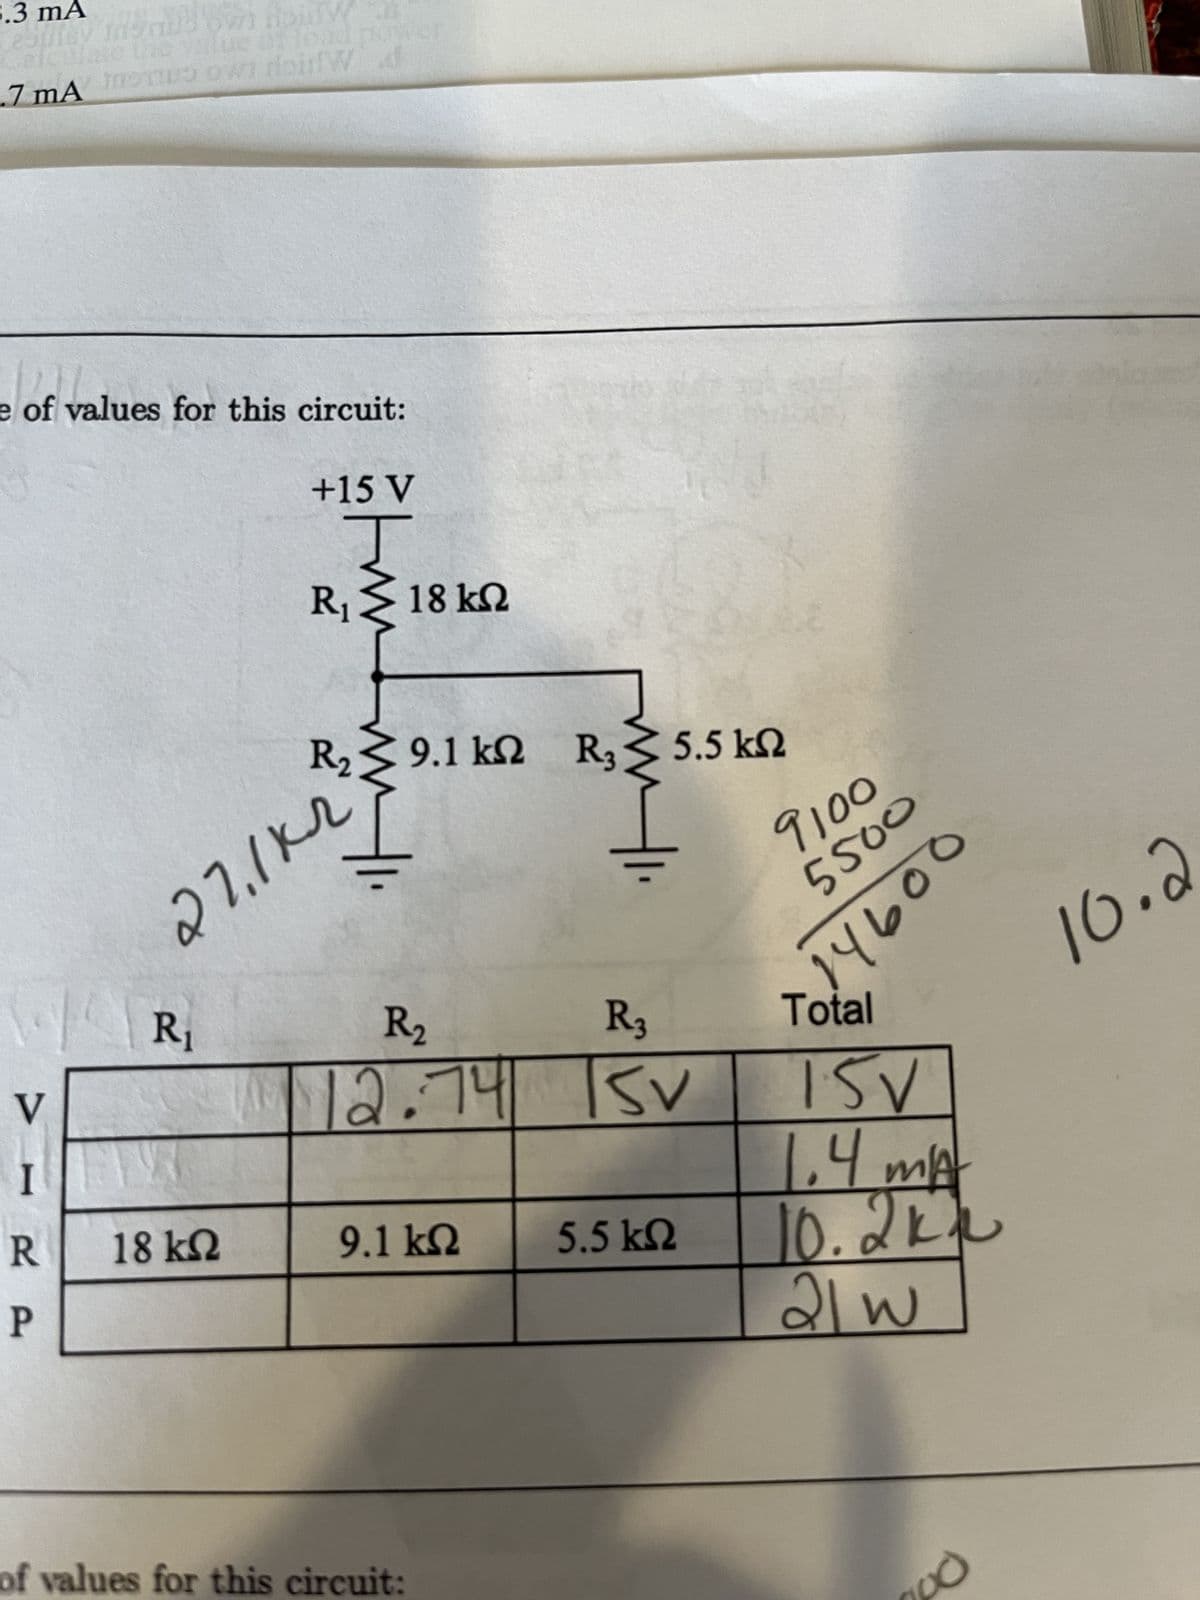 8.3 mA
and i Horw
Sulay me
alculate the value of load power
7 mA ISTI own doinW4
doidWid
d
e of values for this circuit:
V
I
R
P
R₁
+15 V
J
R Σ 18 ΚΩ
27.1K2
W
18 ΚΩ
<
R2 Σ 9.1 kΩ R, ≥ 5.5 ΚΩ
MI
R₂
R3
12.74 TSV
9.1 ΚΩ
WHI
of values for this circuit:
5.5 ΚΩ
9100
5500
14600
Total
1SV
1.4 mA
10.2kk
21 W
po
10.2